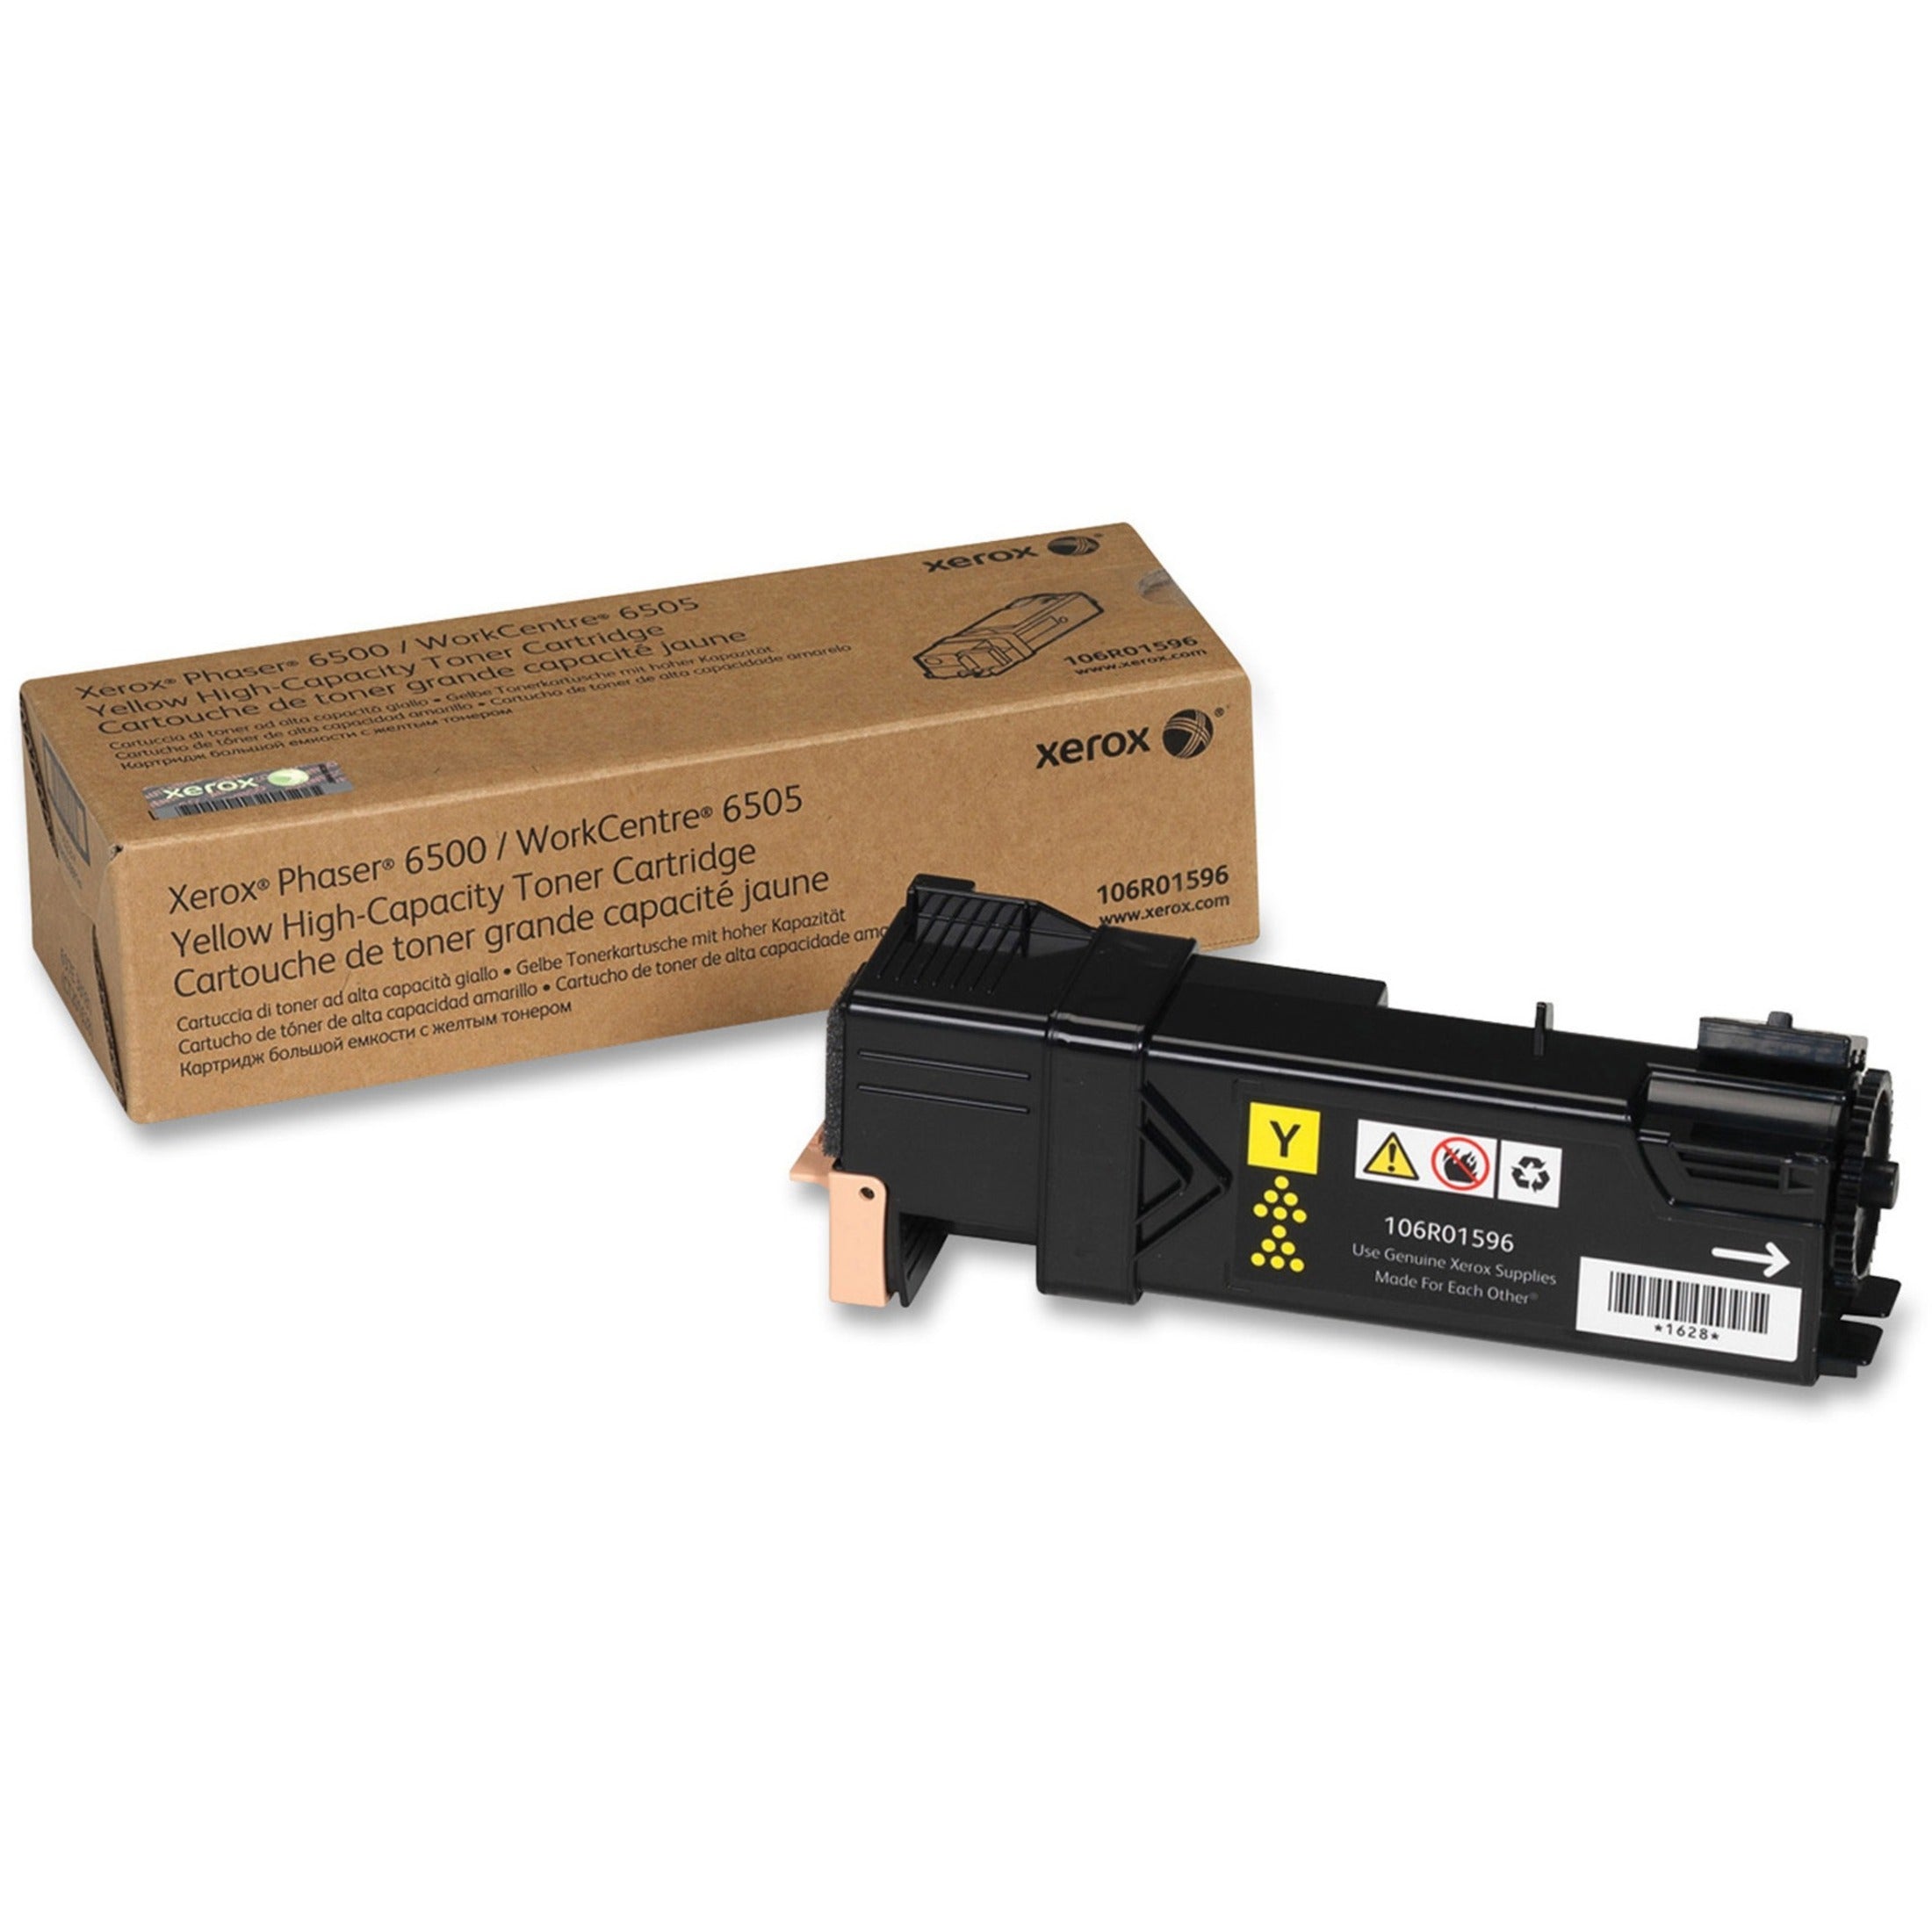 Xerox 106R01596 Phaser 6500/WC 6505 High Capacity Toner Cartridge, Yellow, 2500 Pages